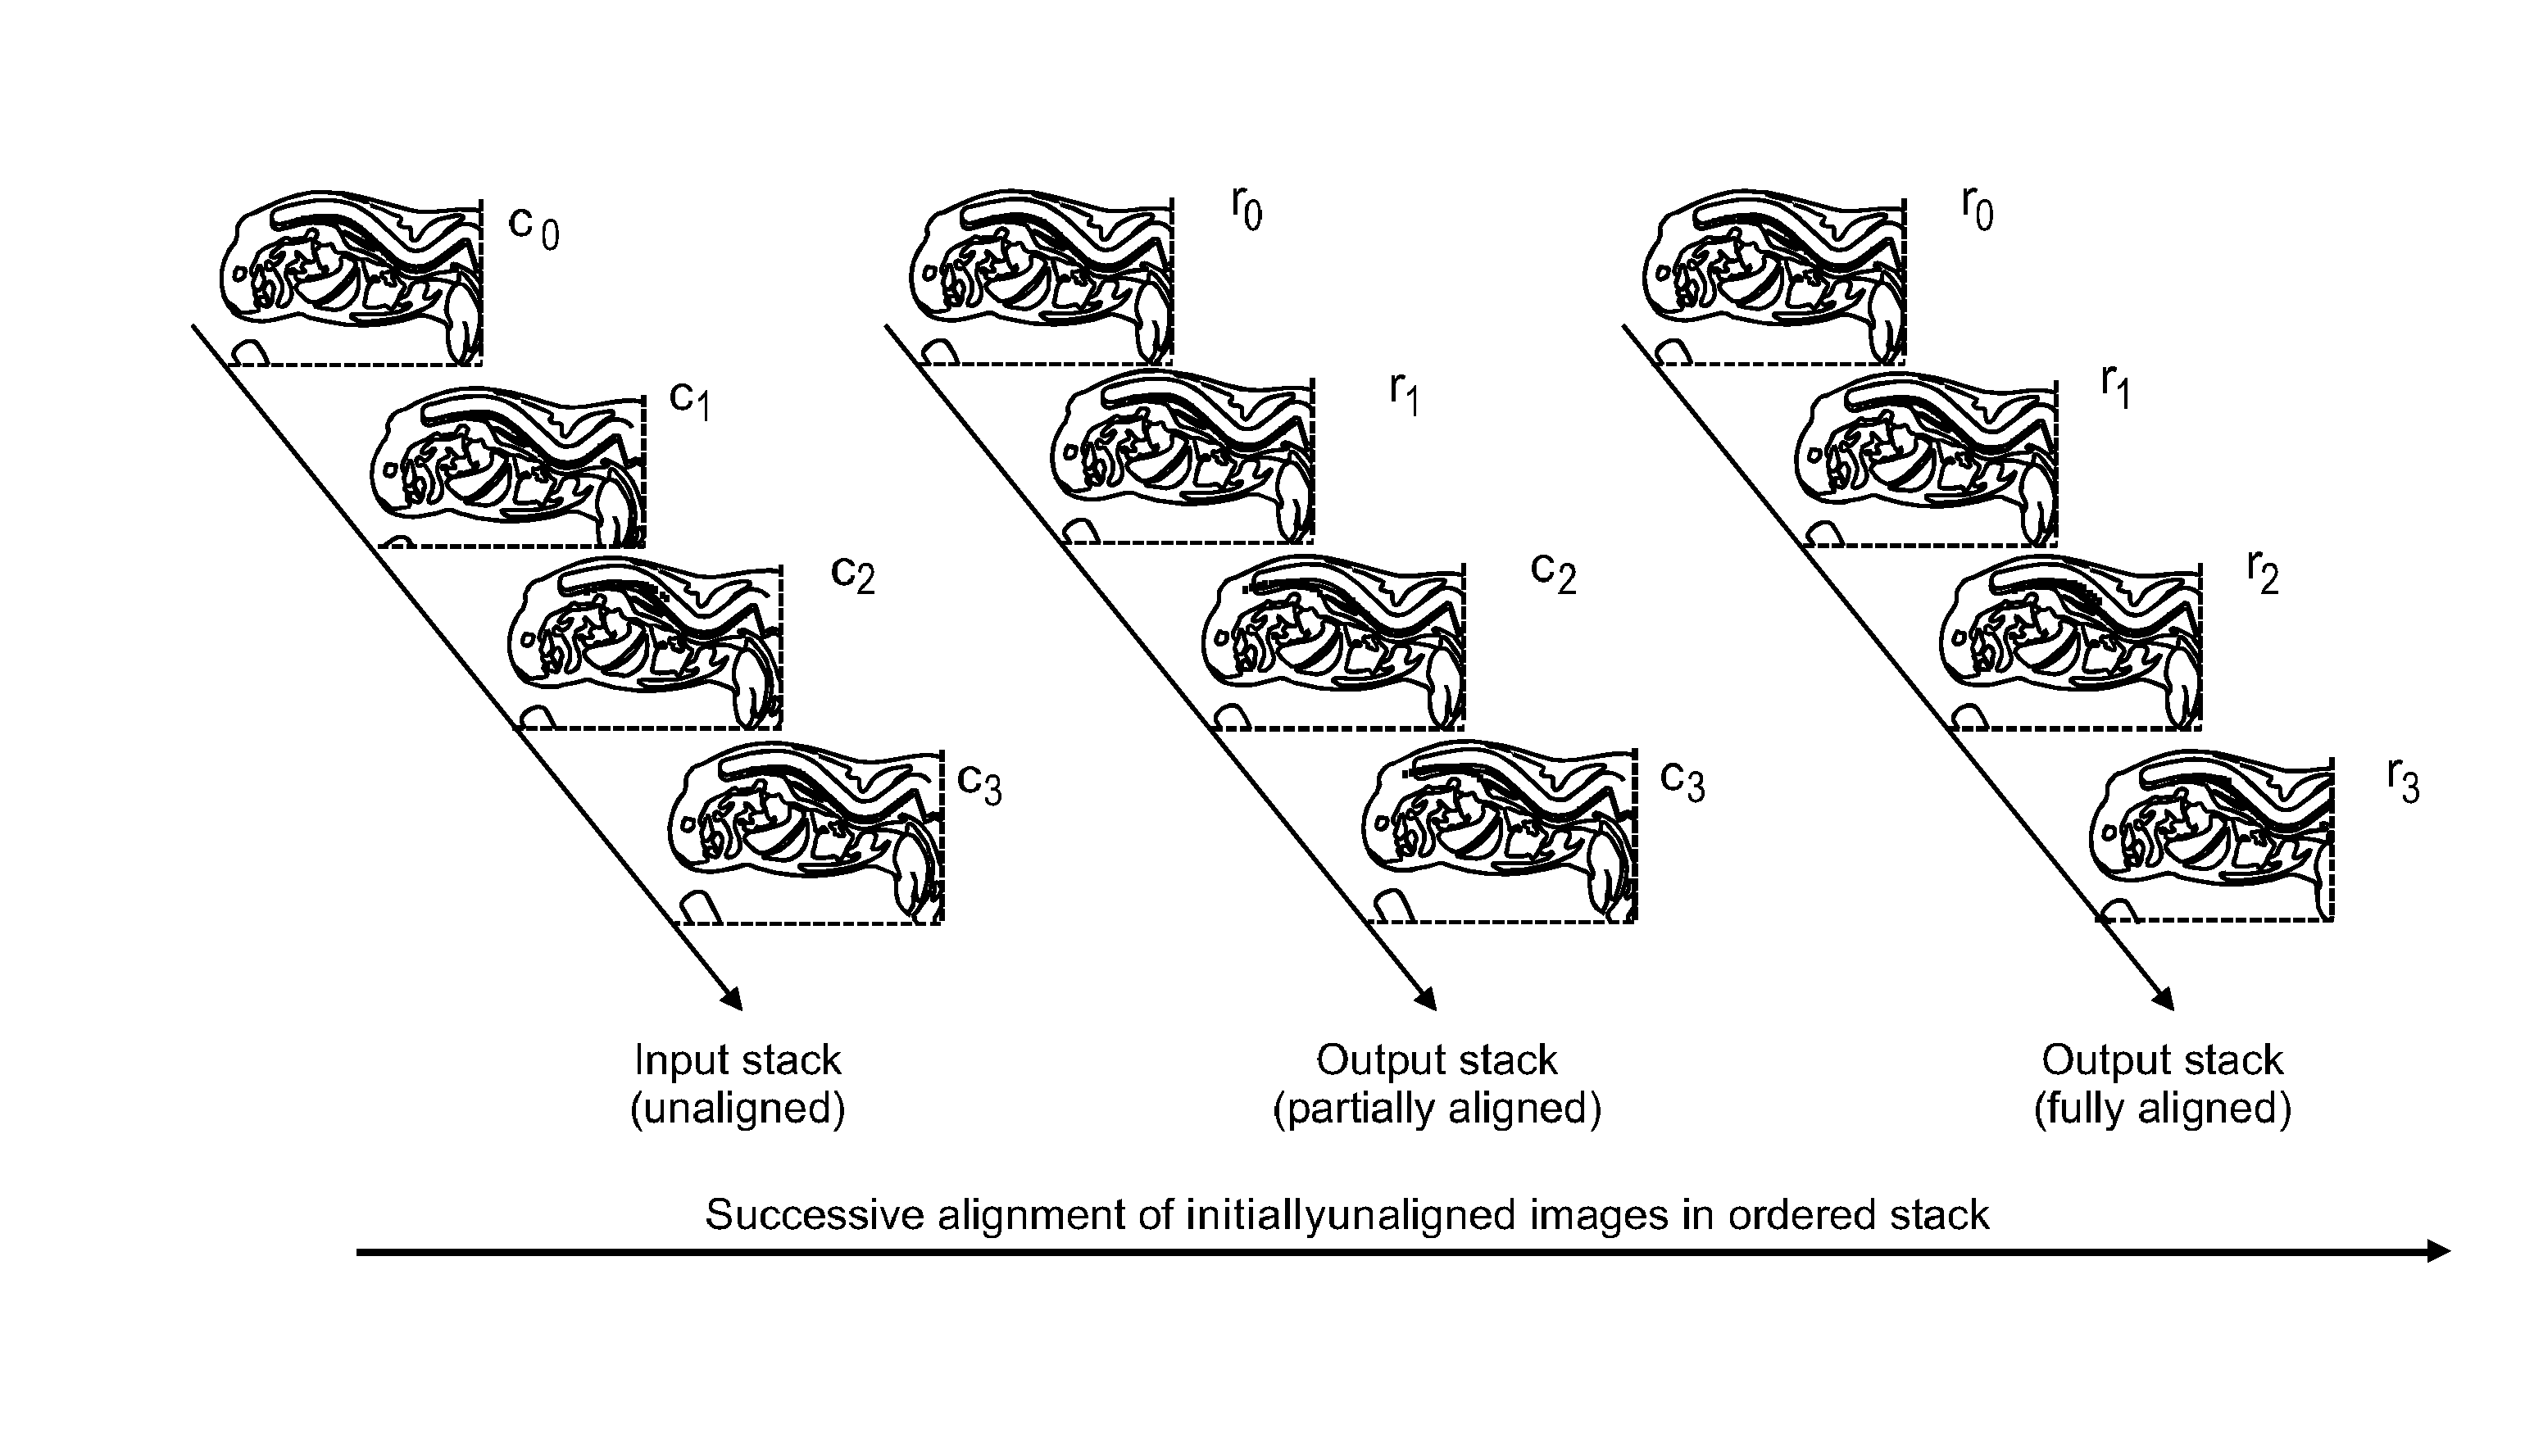 Alignment of an ordered stack of images from a specimen